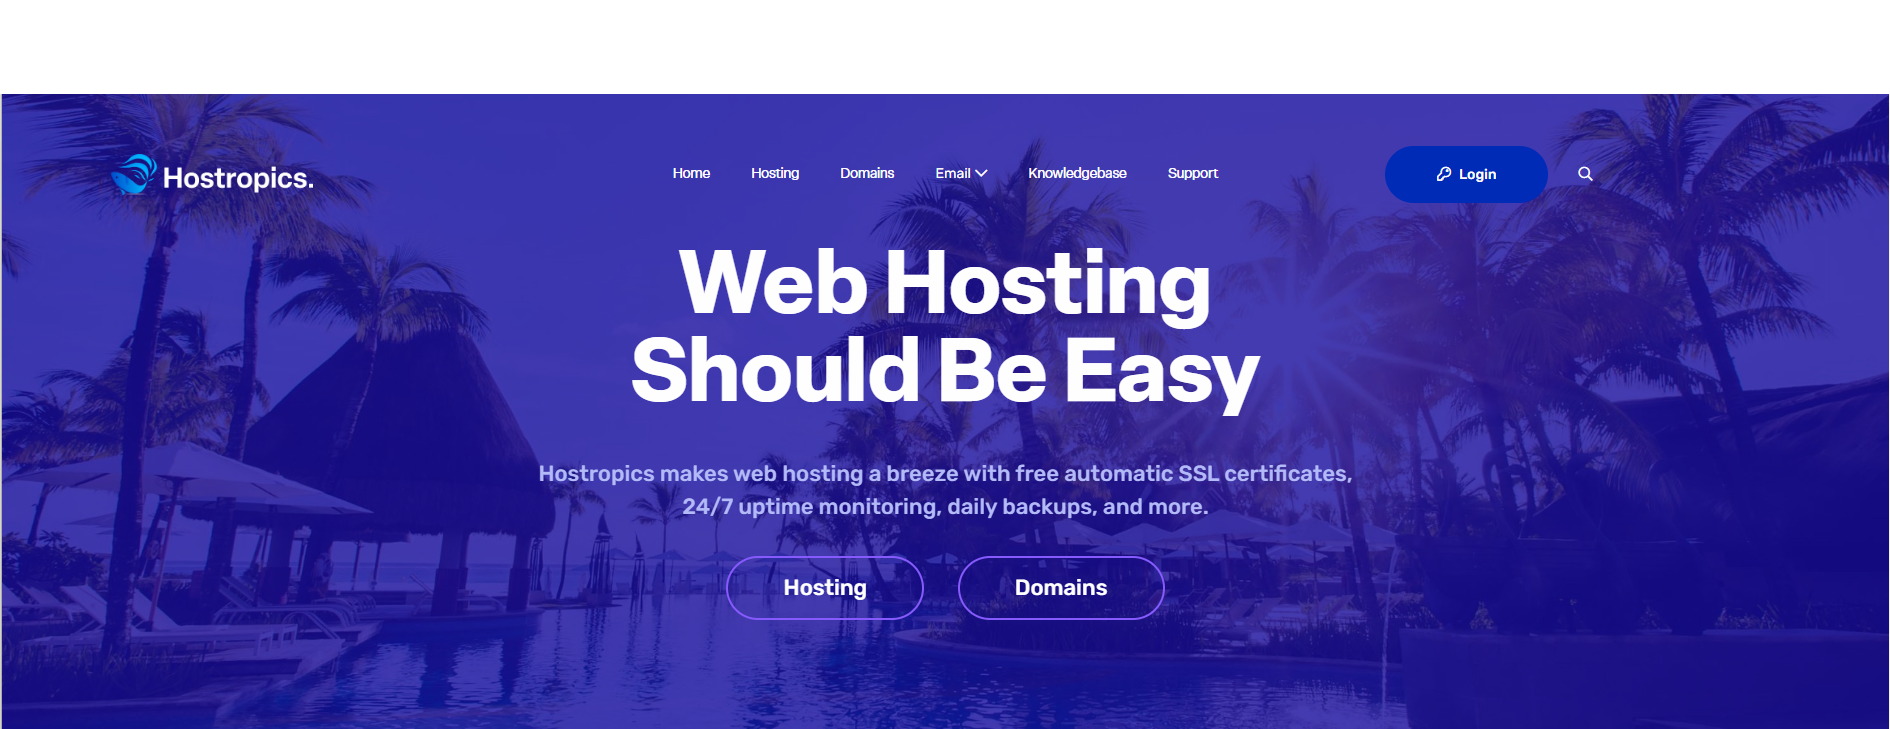 Hostropics makes web hosting a breeze with free automatic SSL certificates, 24/7 uptime monitoring, daily backups, and more.